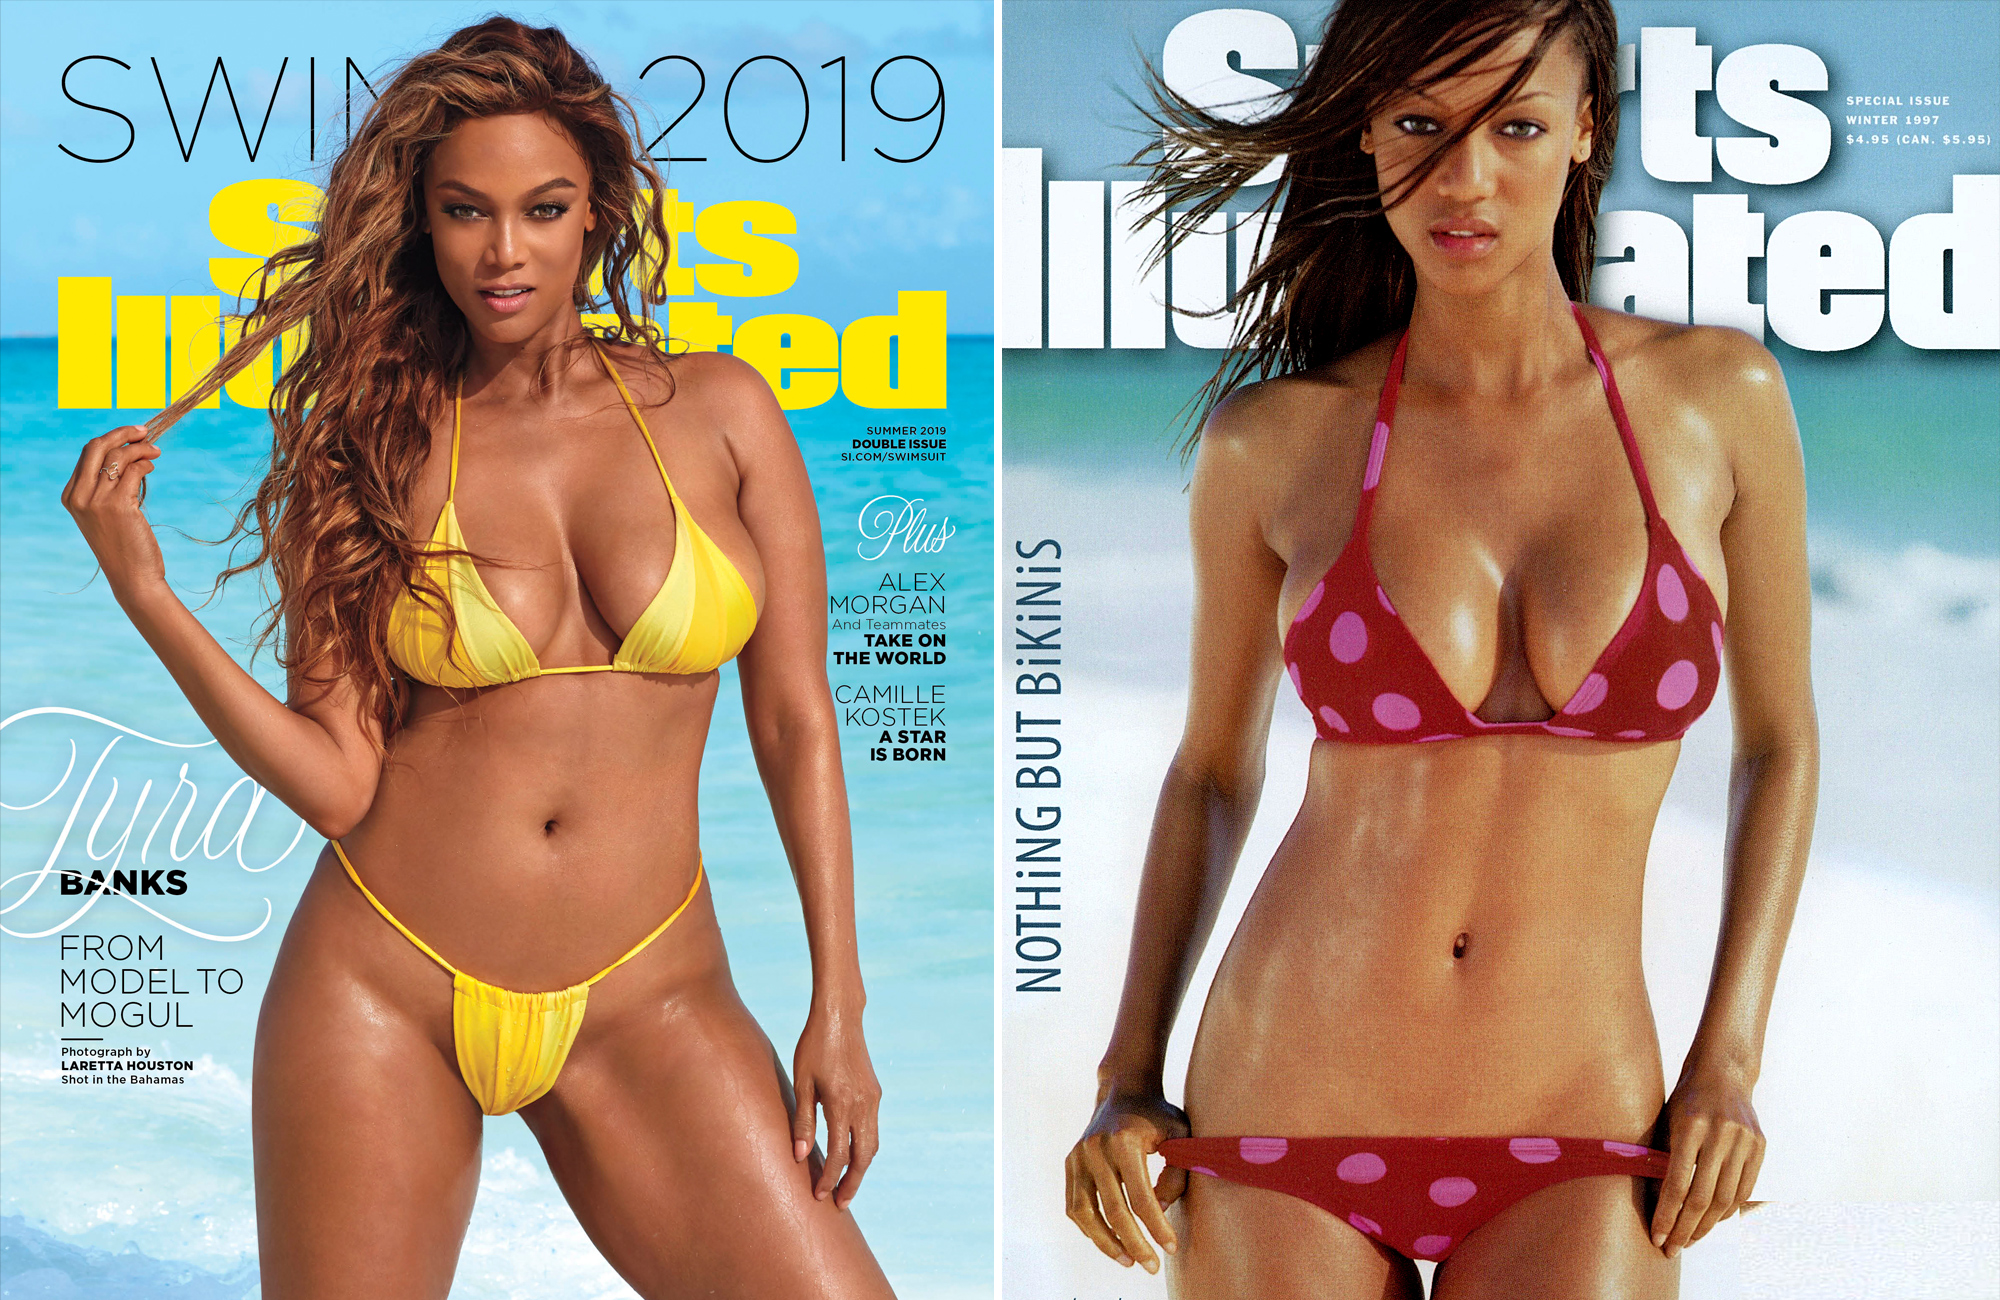 Tyra Banks Opens Up On Gaining 25 Pounds Since Posing The 219 Sports Illust...